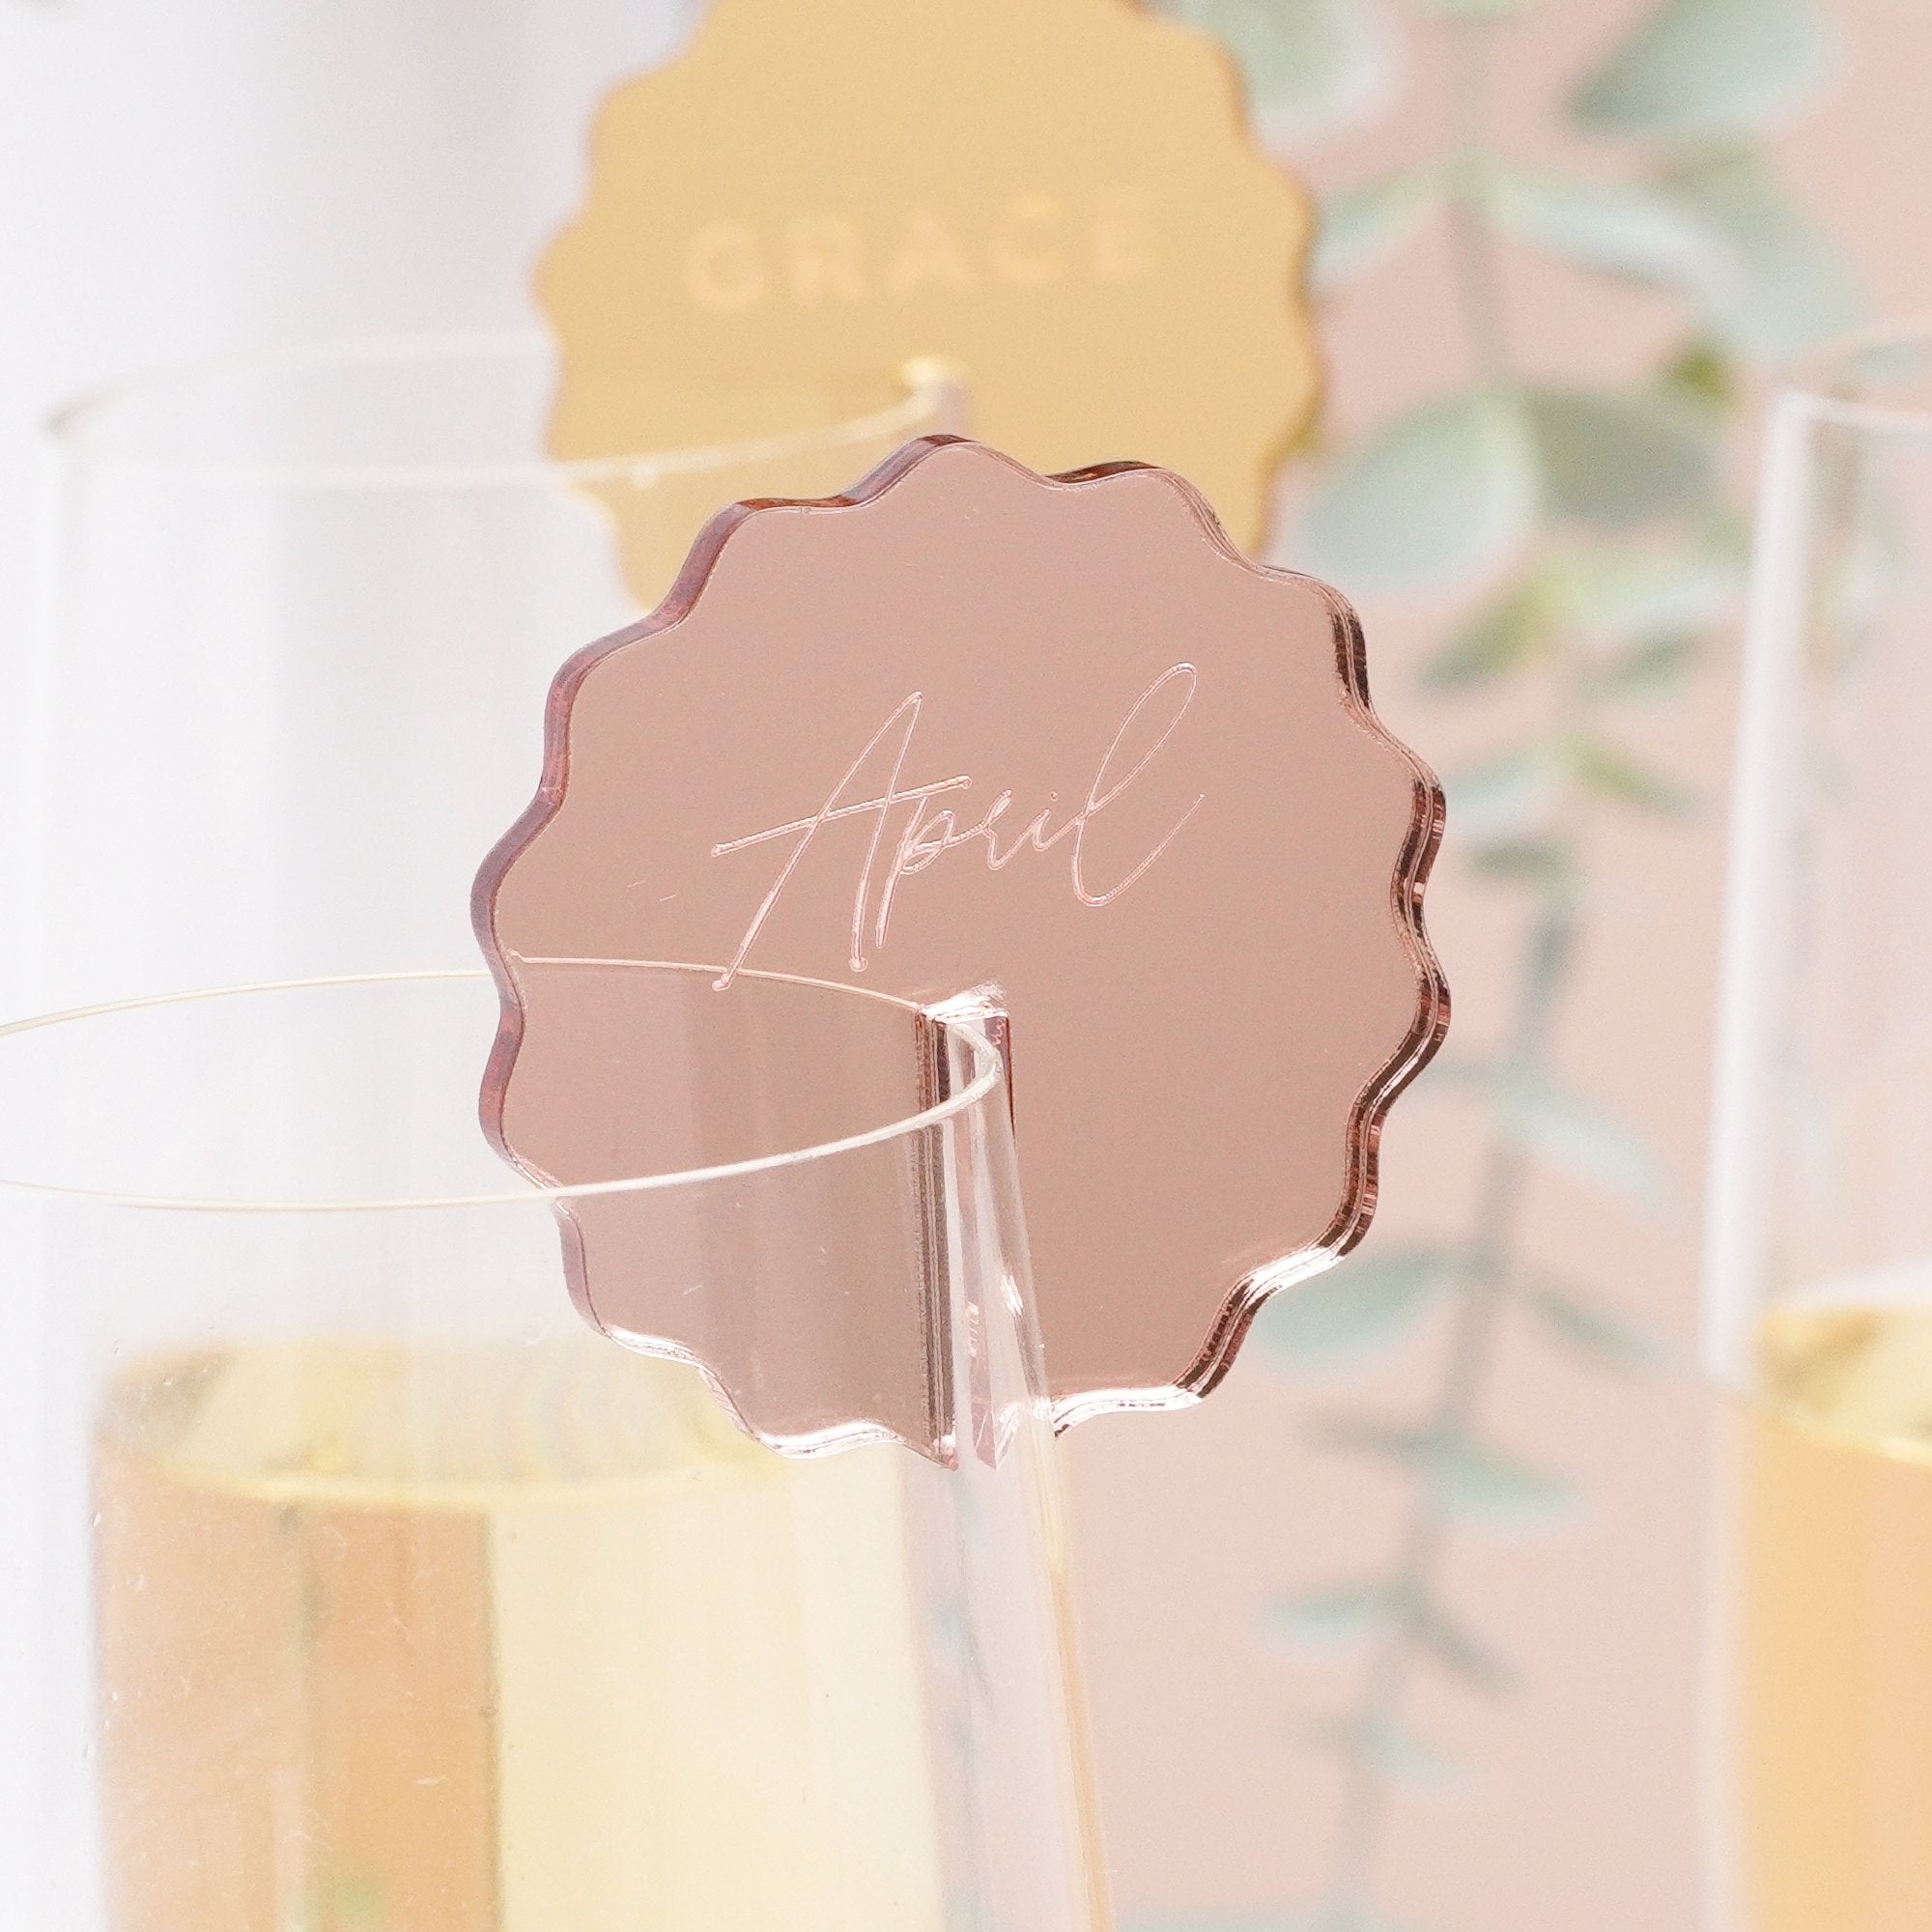 Personalised Party drink charms